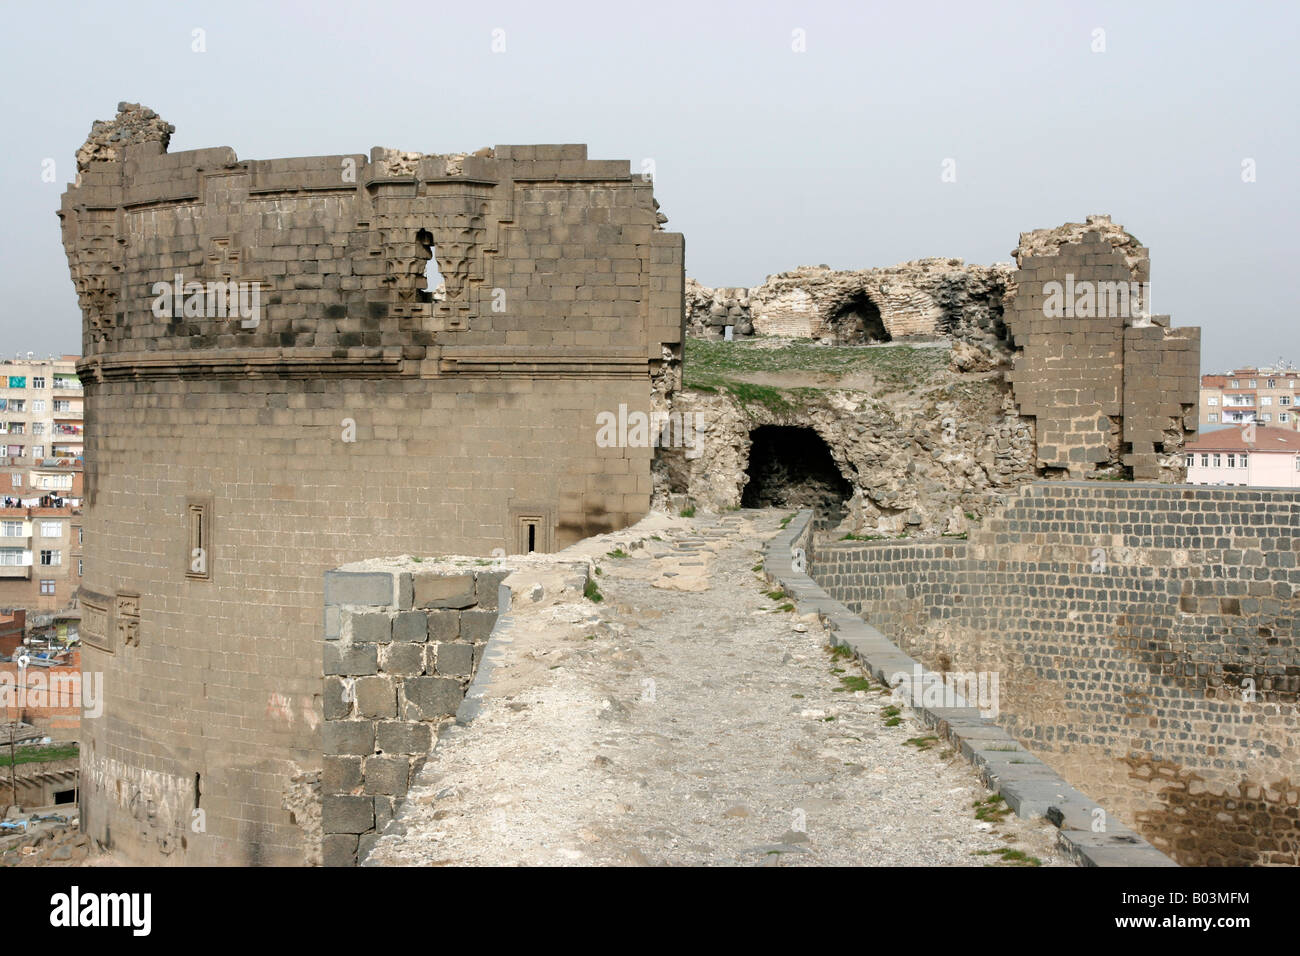 A ruined bastion in the old city walls of Diyarbakir Turkey Stock Photo